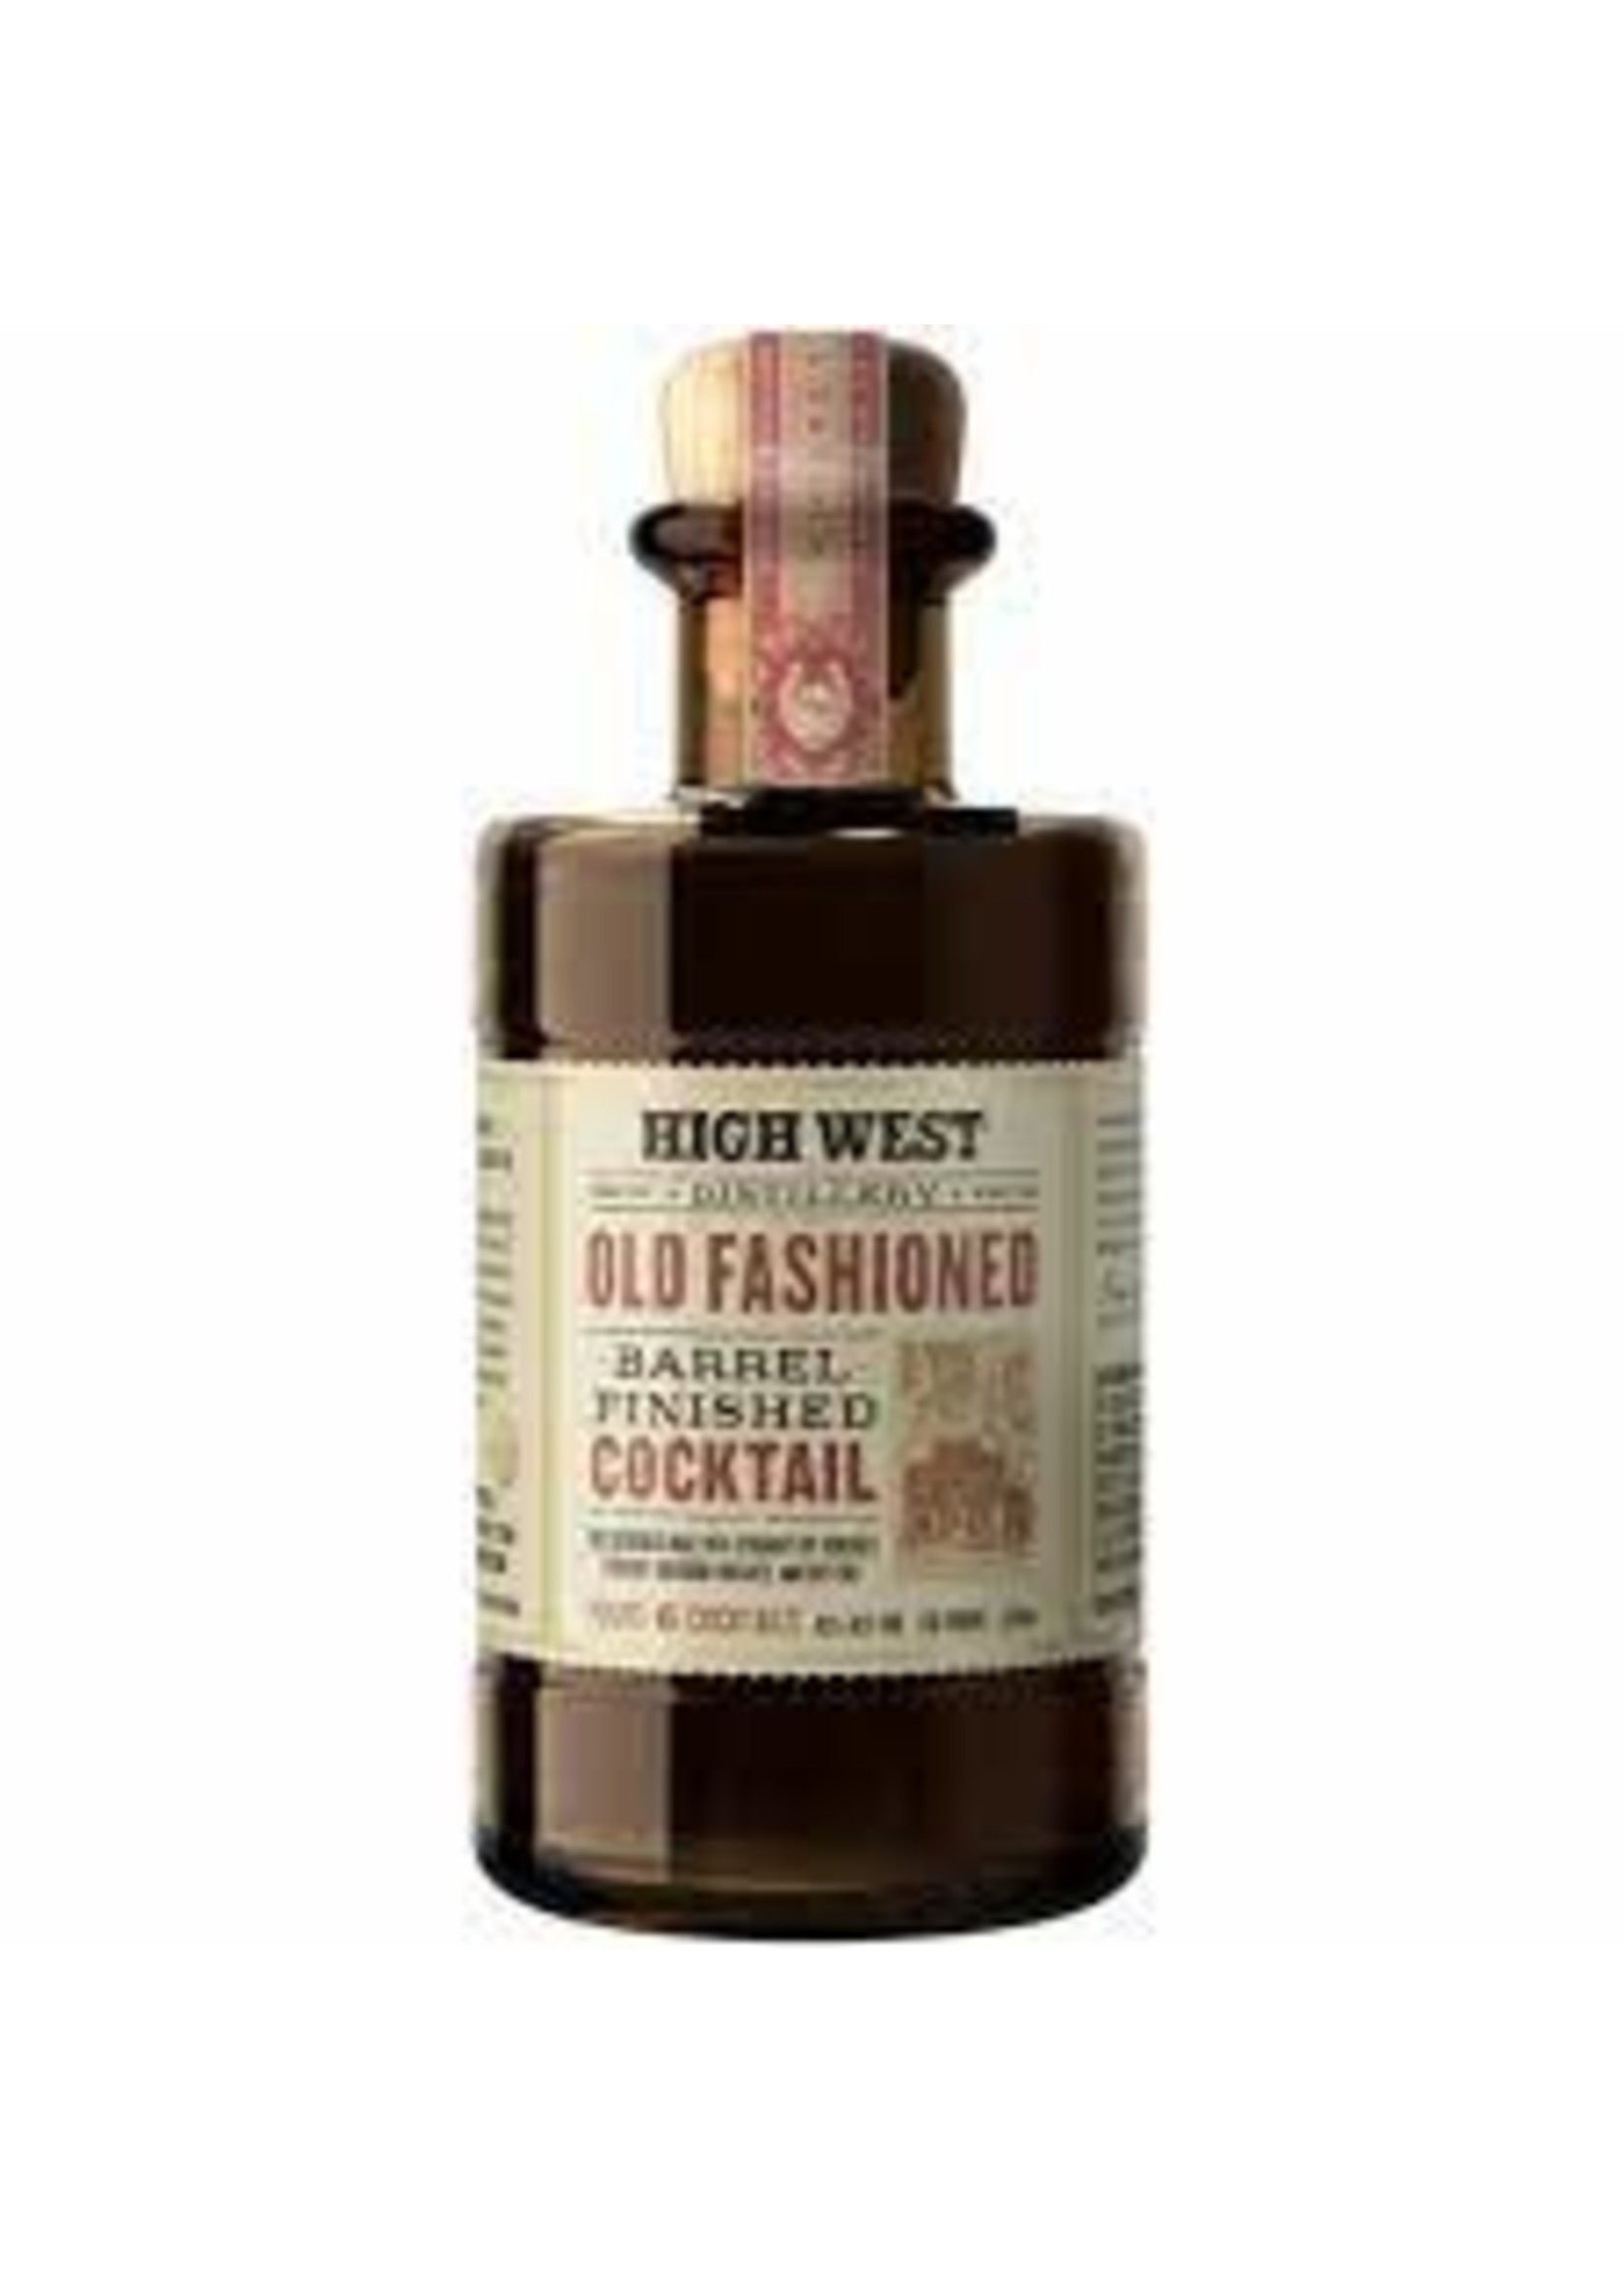 HIGH WEST OLD FASHIONED 375ML